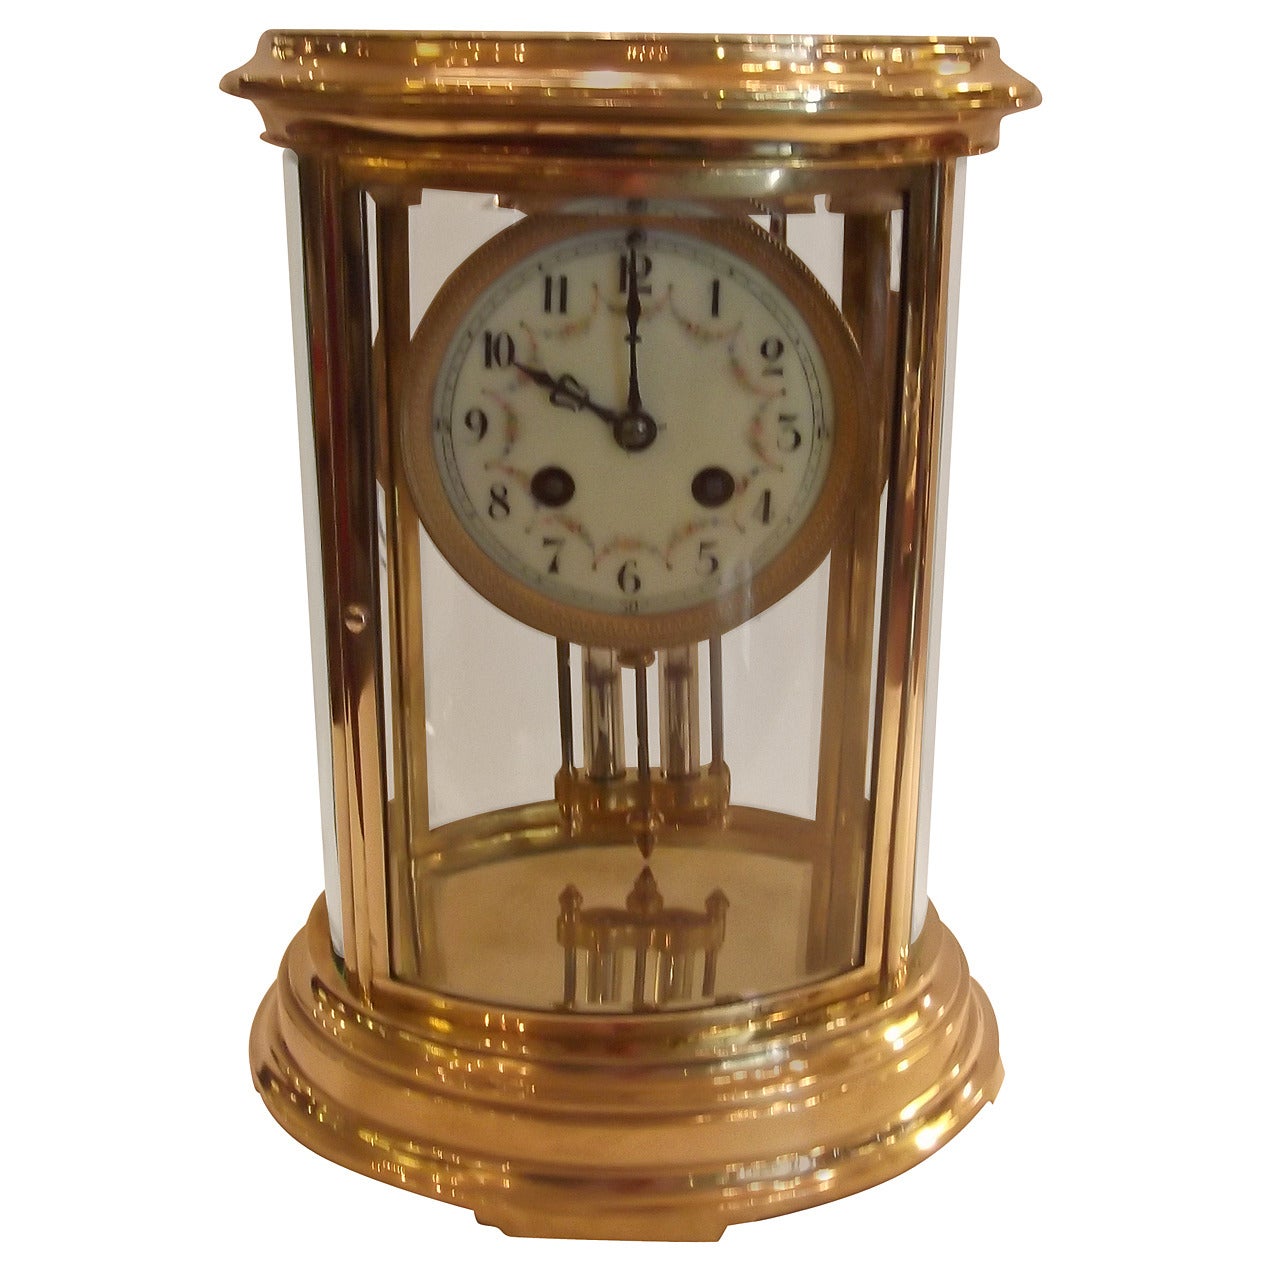 Graceful Oval French Crystal Regulator Clock with Hand-Painted Enamel Face